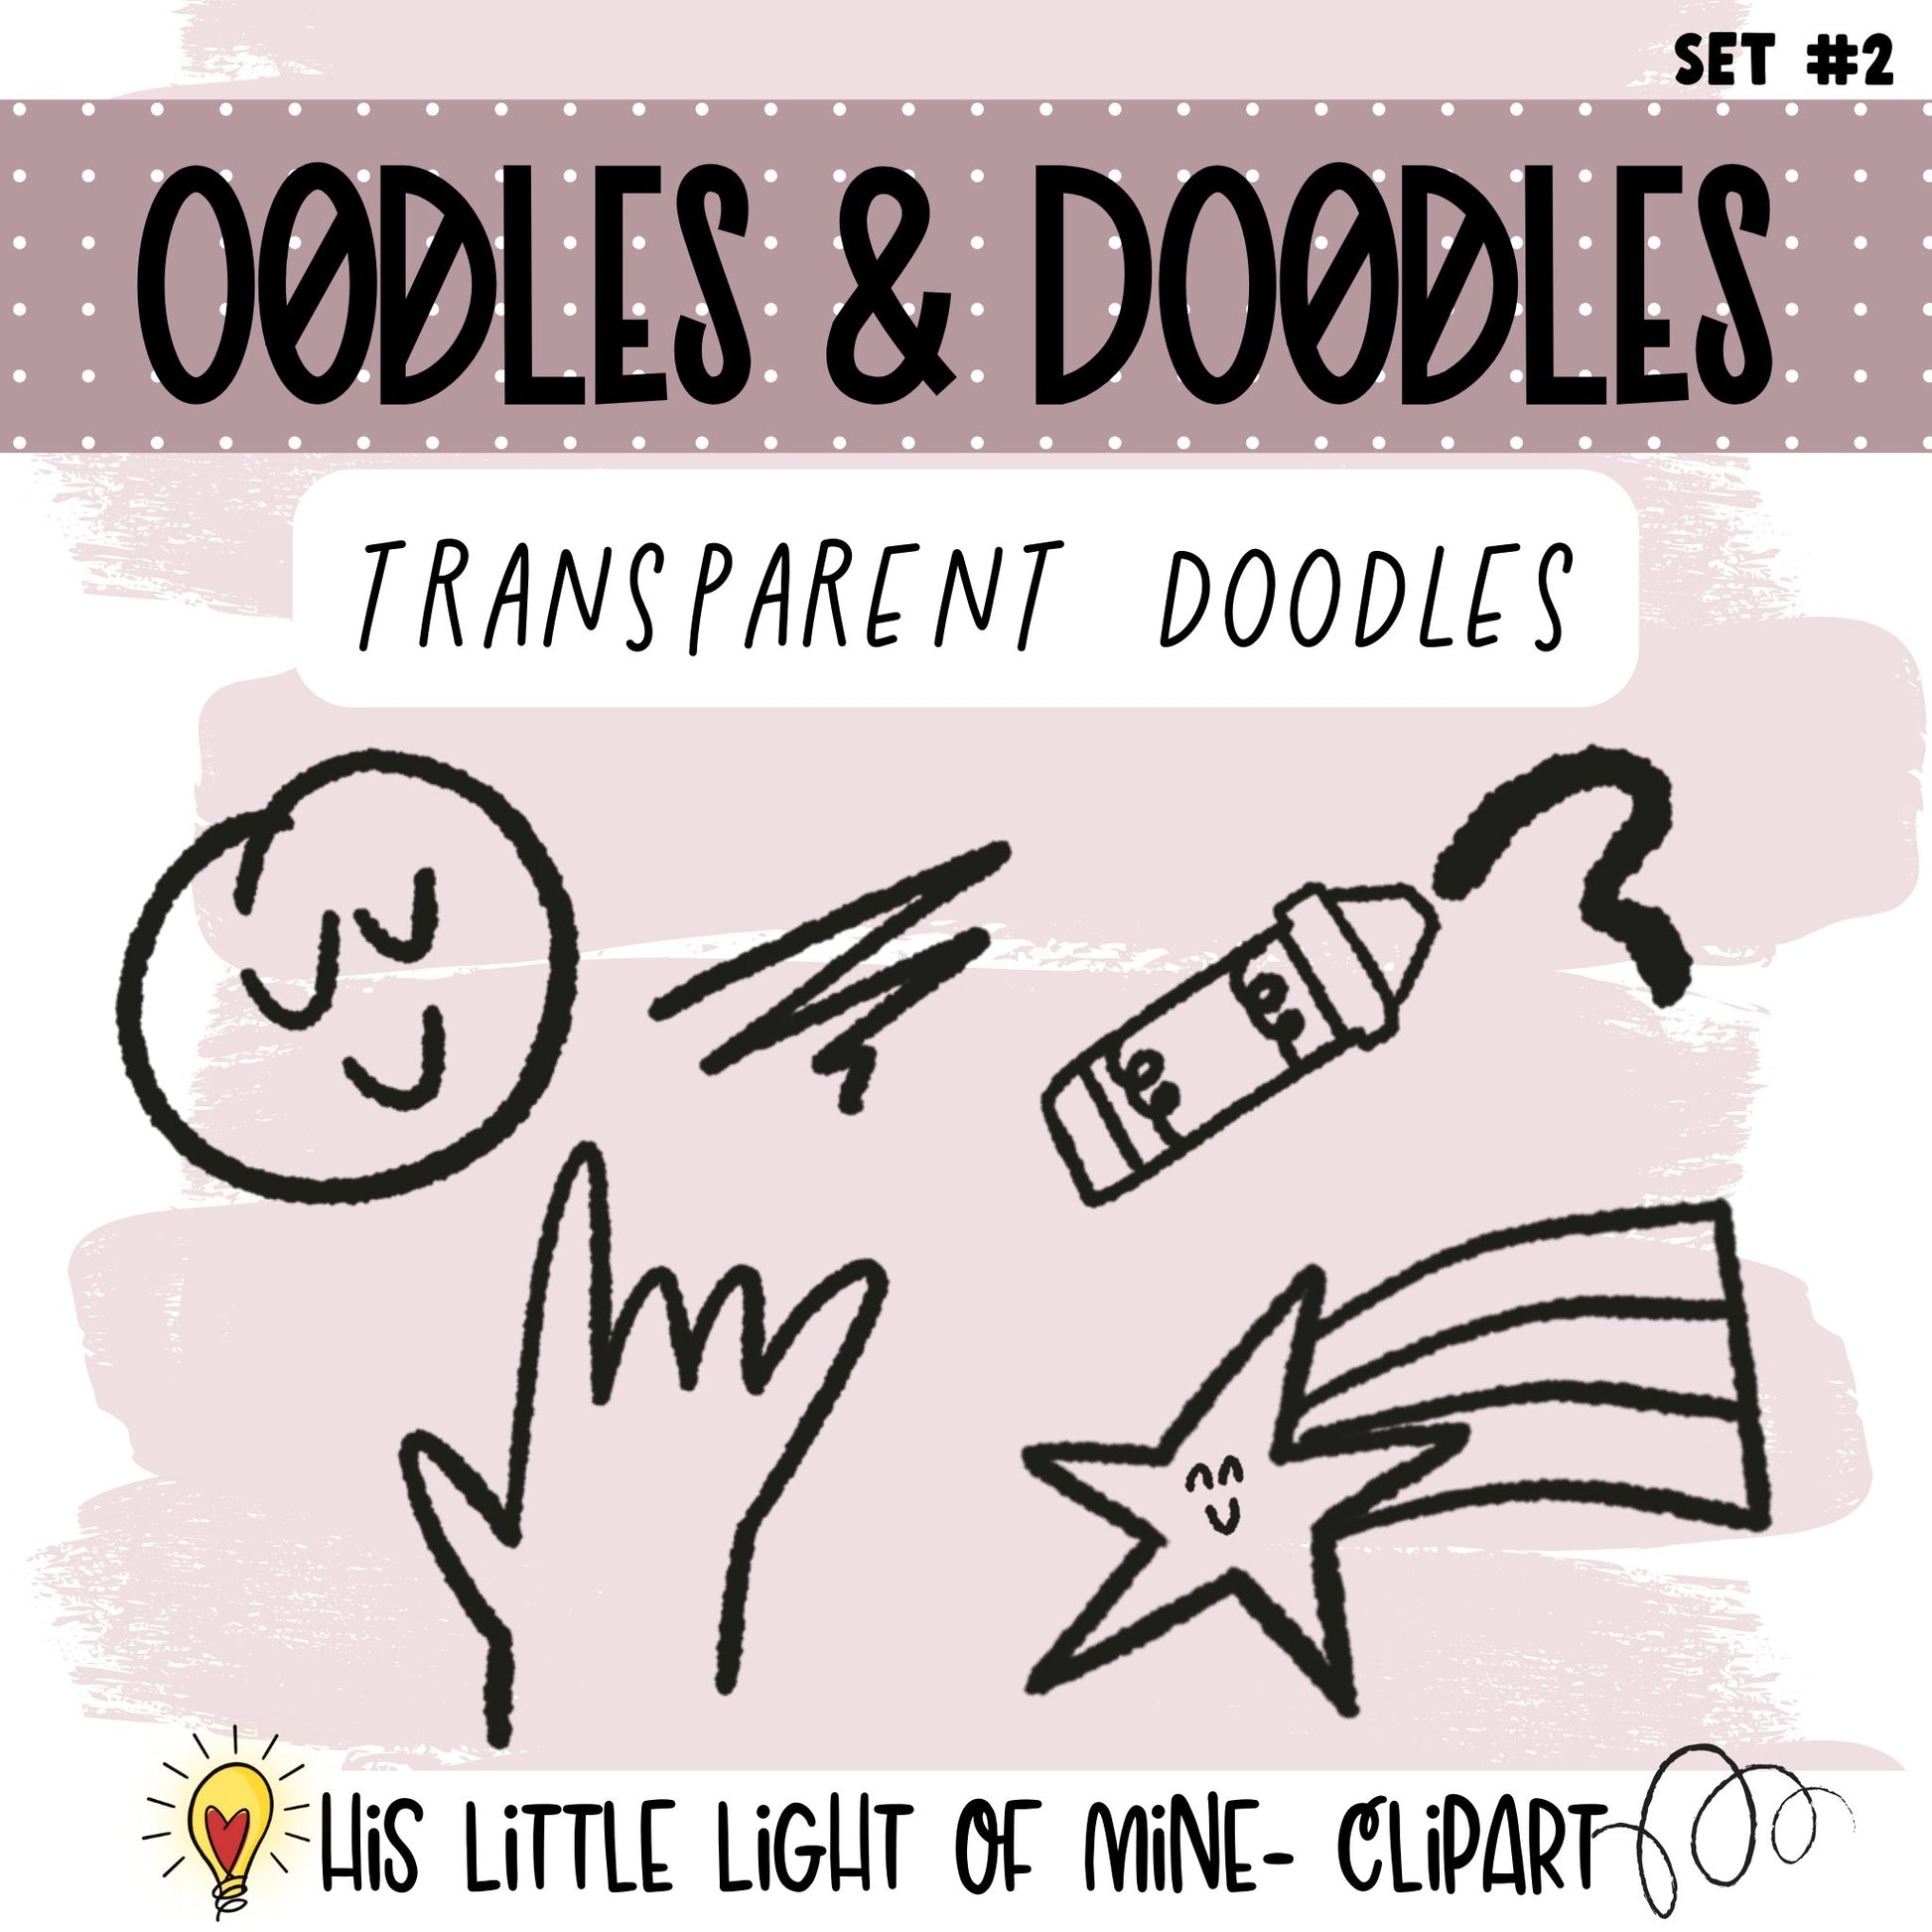 Oodles & Doodles Clip Art Set #2 clip art pack featuring  transparent doodles of a smiling face, the ASL handshape “I Love You,” a crayon, a squiggle and a shooting star.